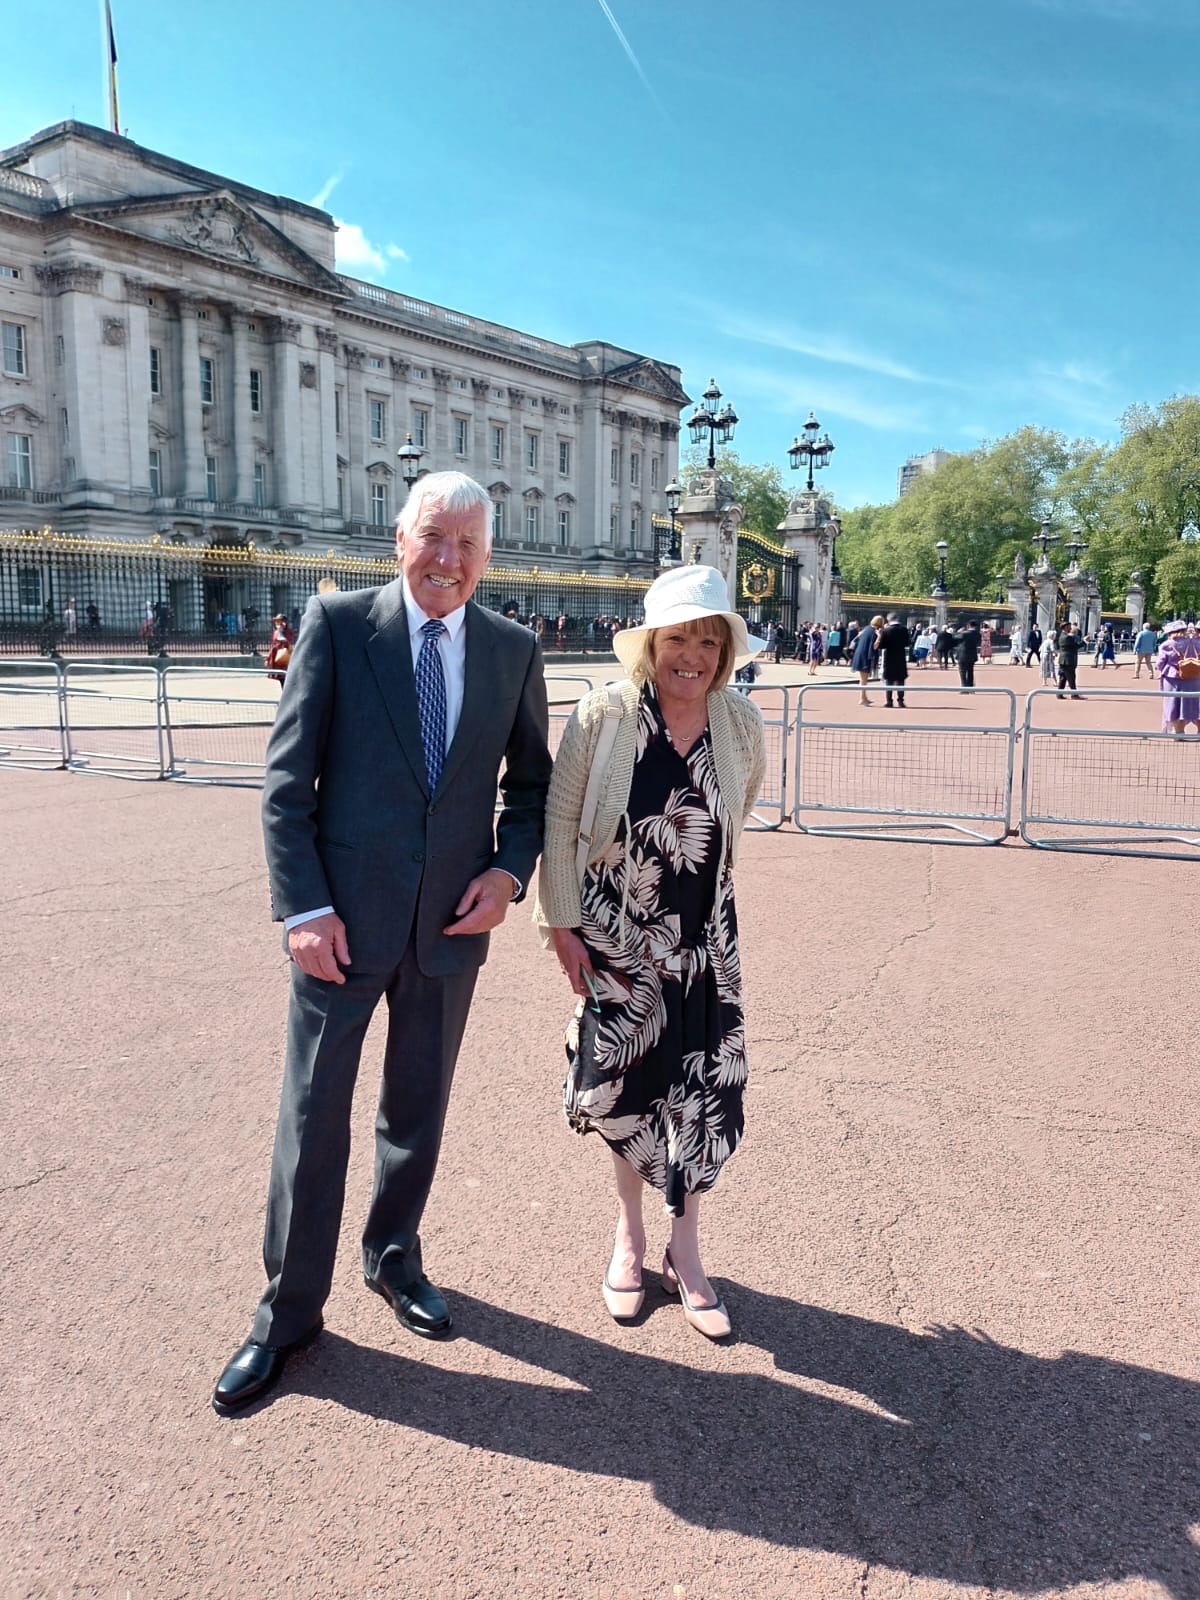 Sharon Leonard honoured at Buckingham Palace Garden Party for four decades of commitment to care